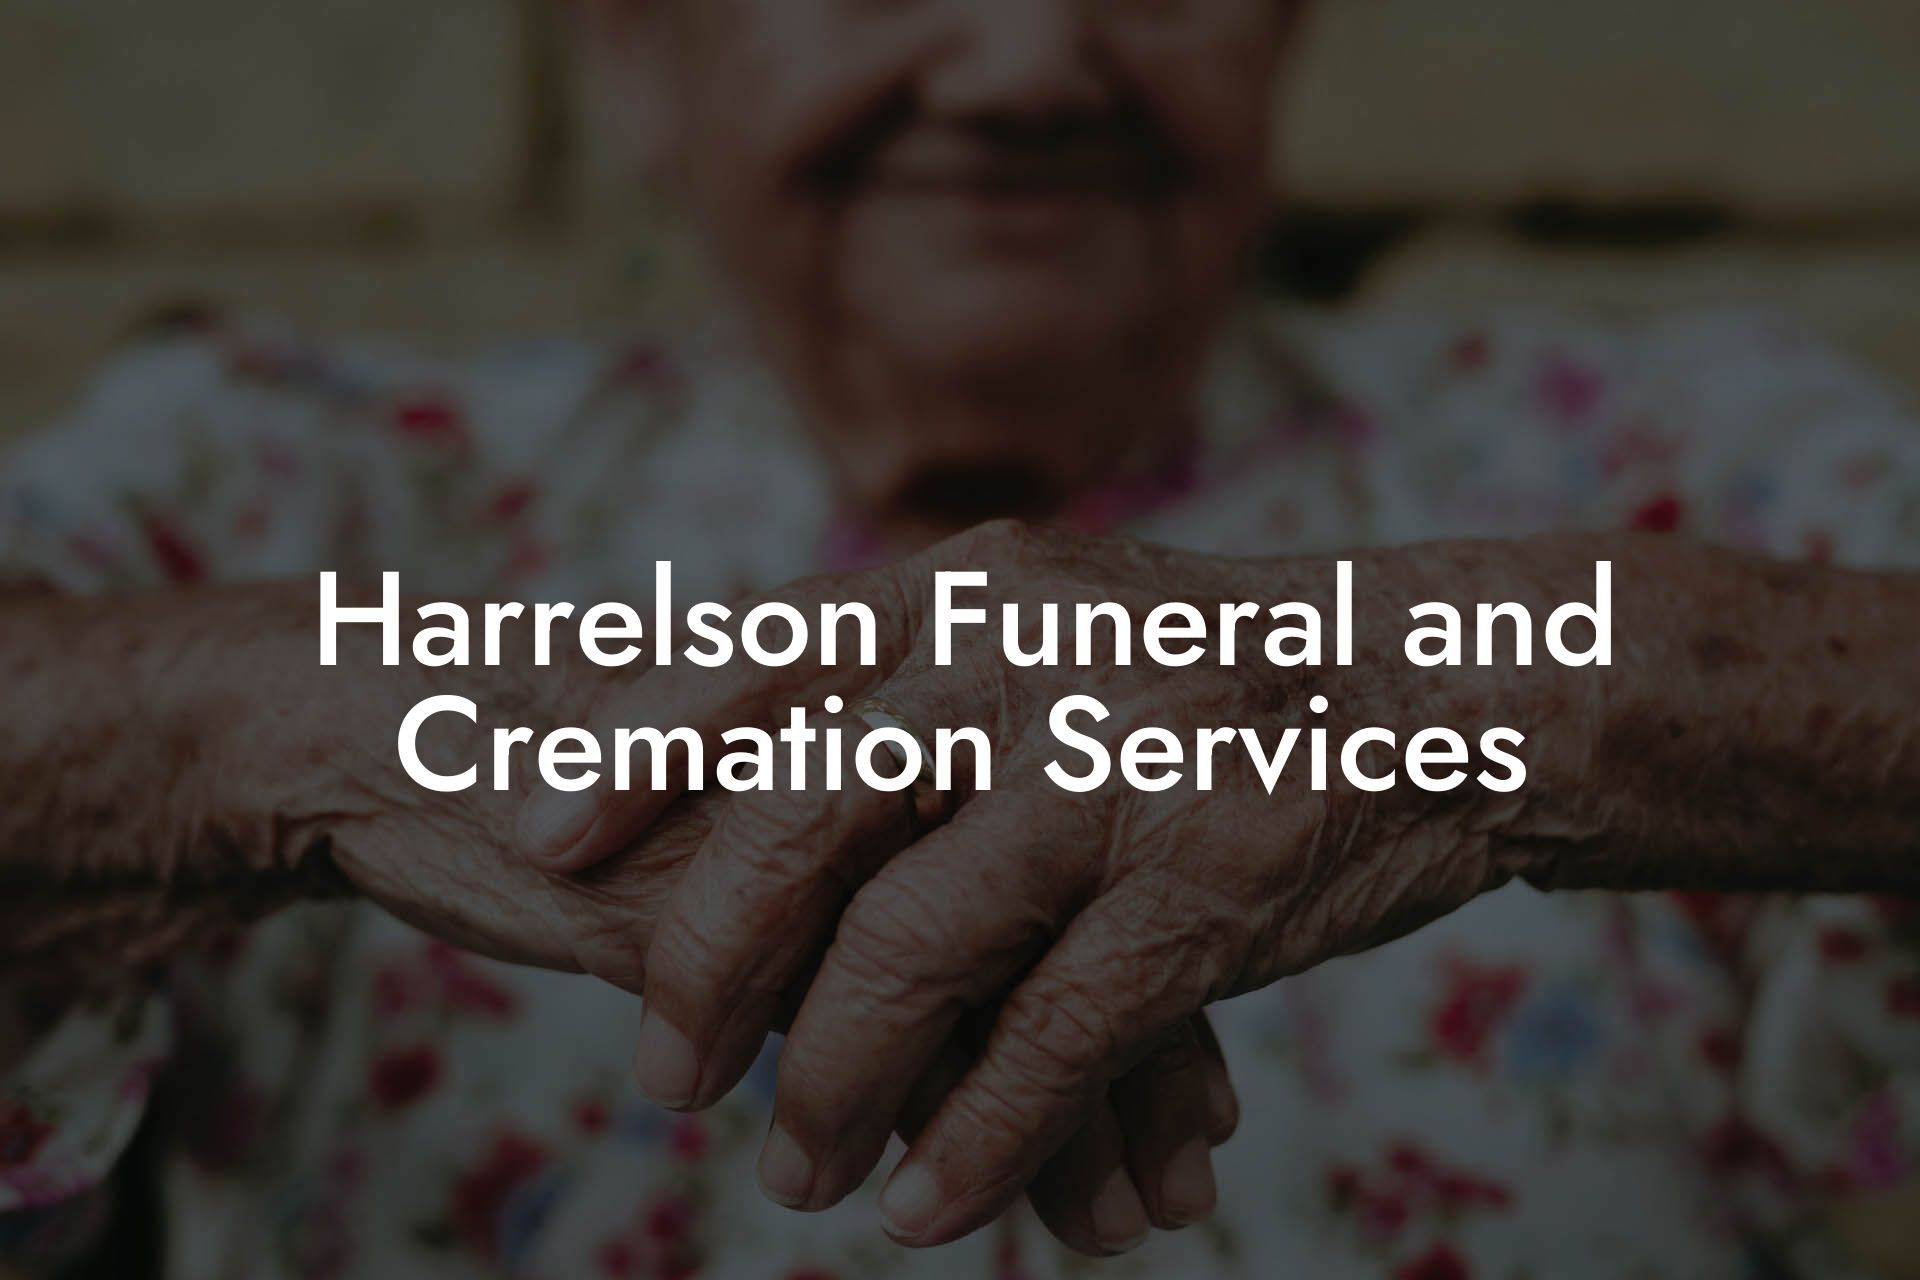 Harrelson Funeral and Cremation Services